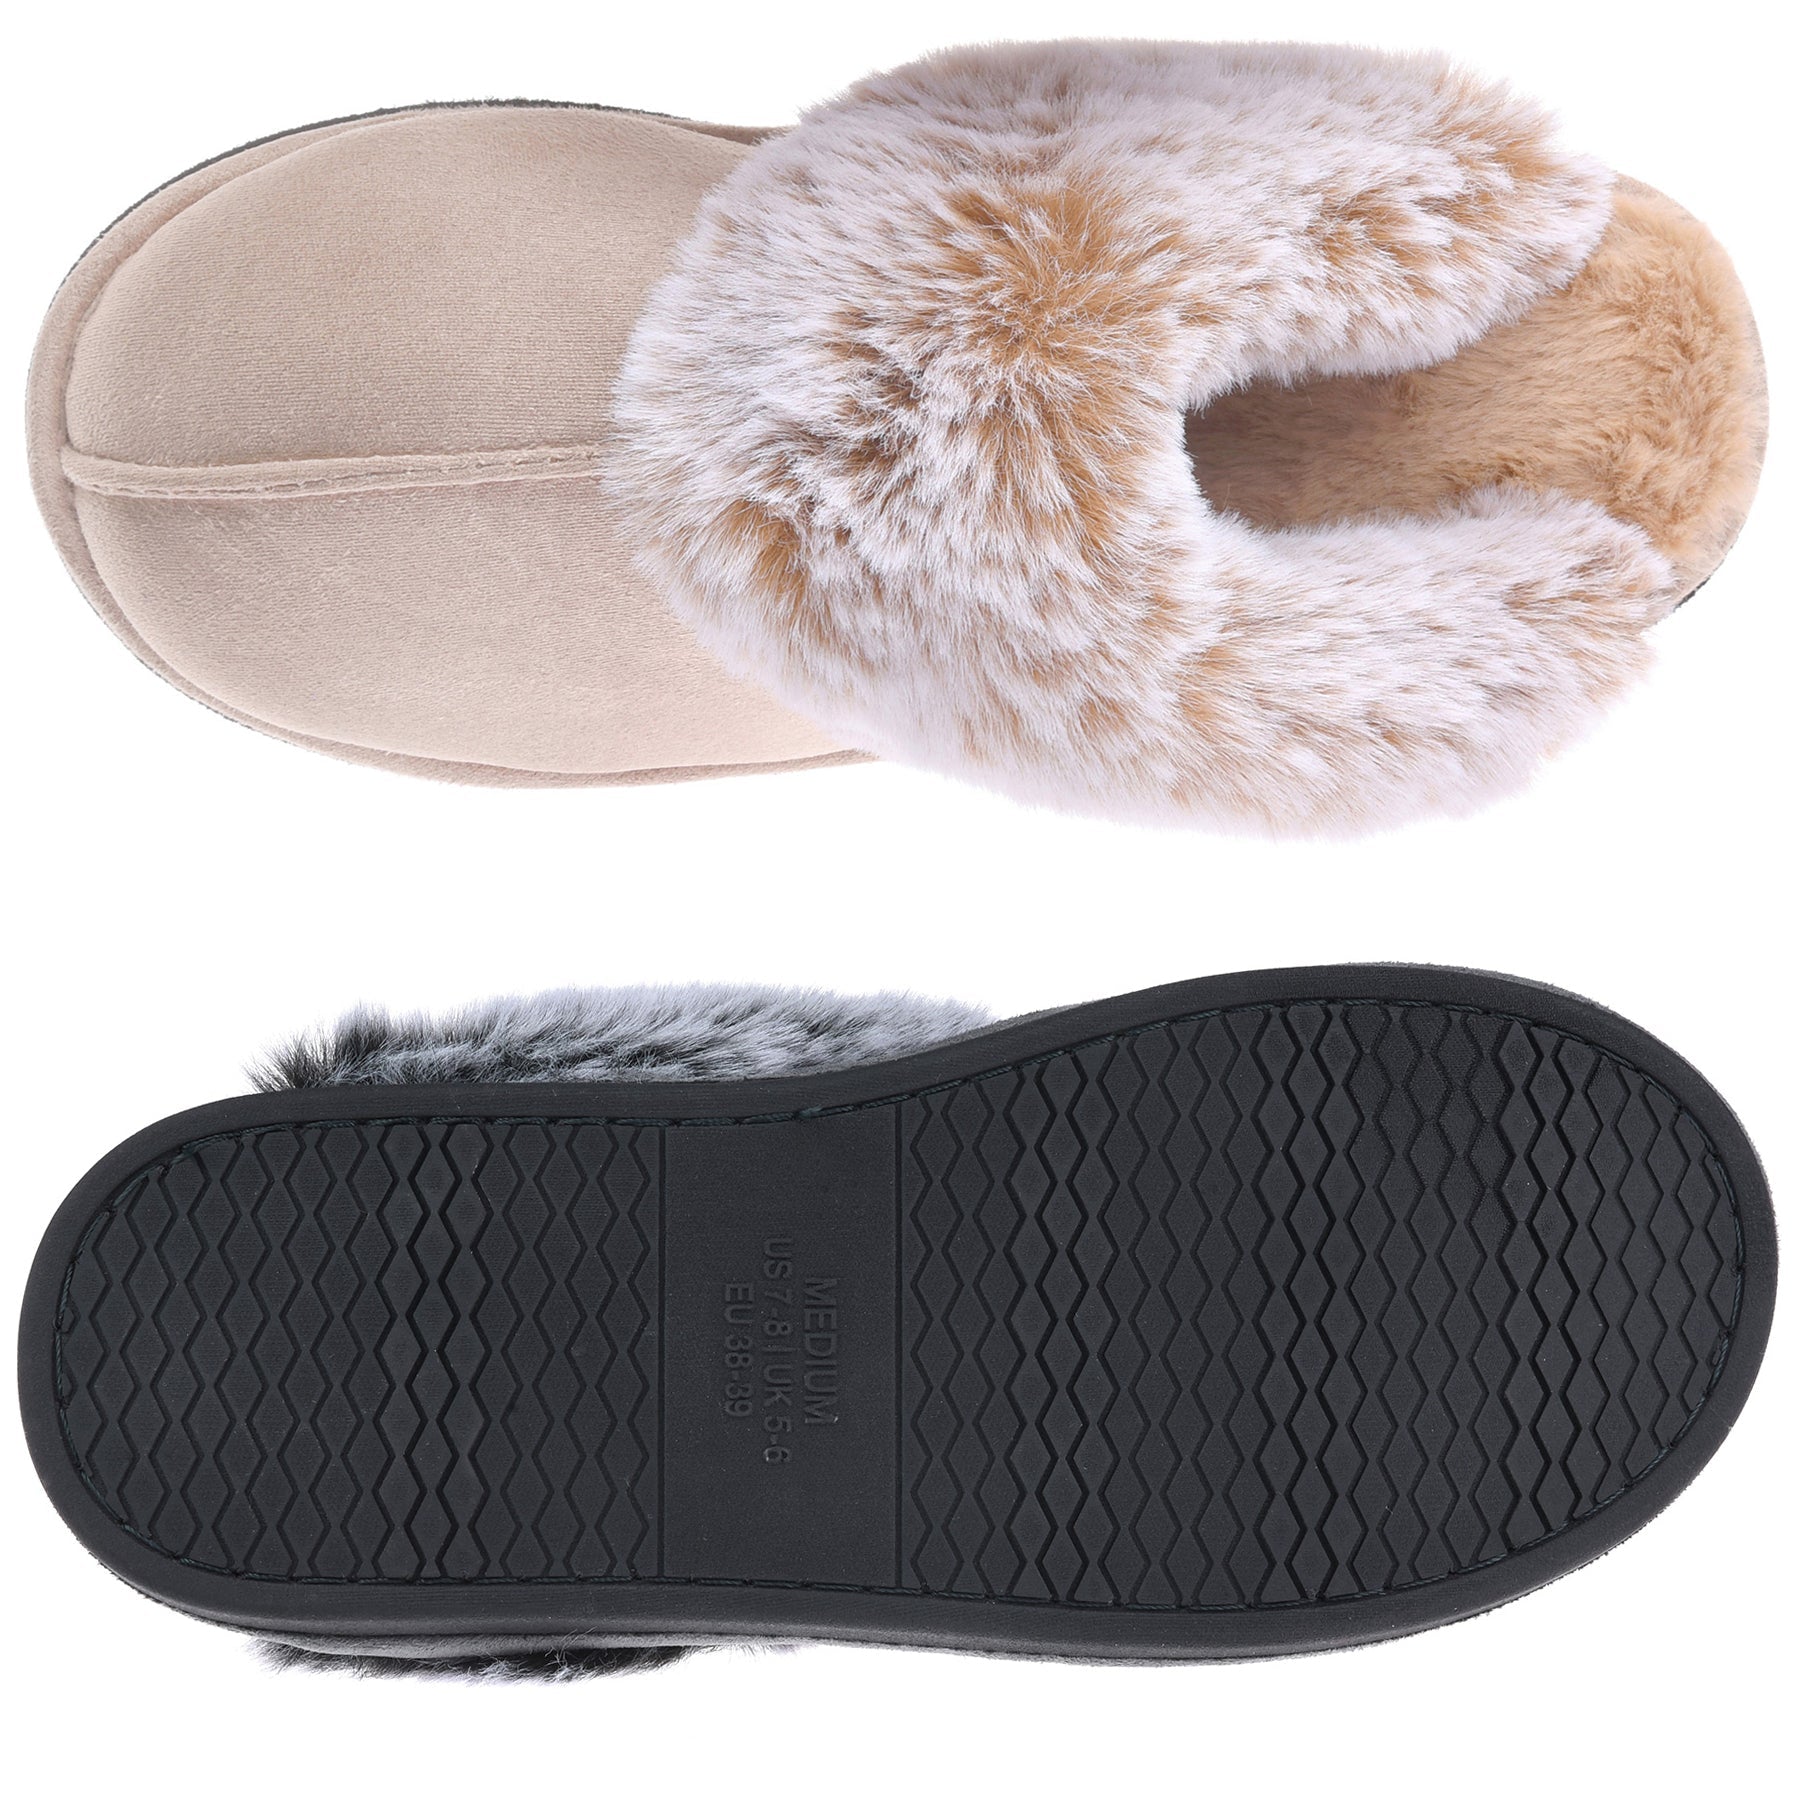 VONMAY Women's Comfy Fuzzy House Slipper Scuff Memory Foam Slip on Warm  Moccasin Style Indoor Outdoor